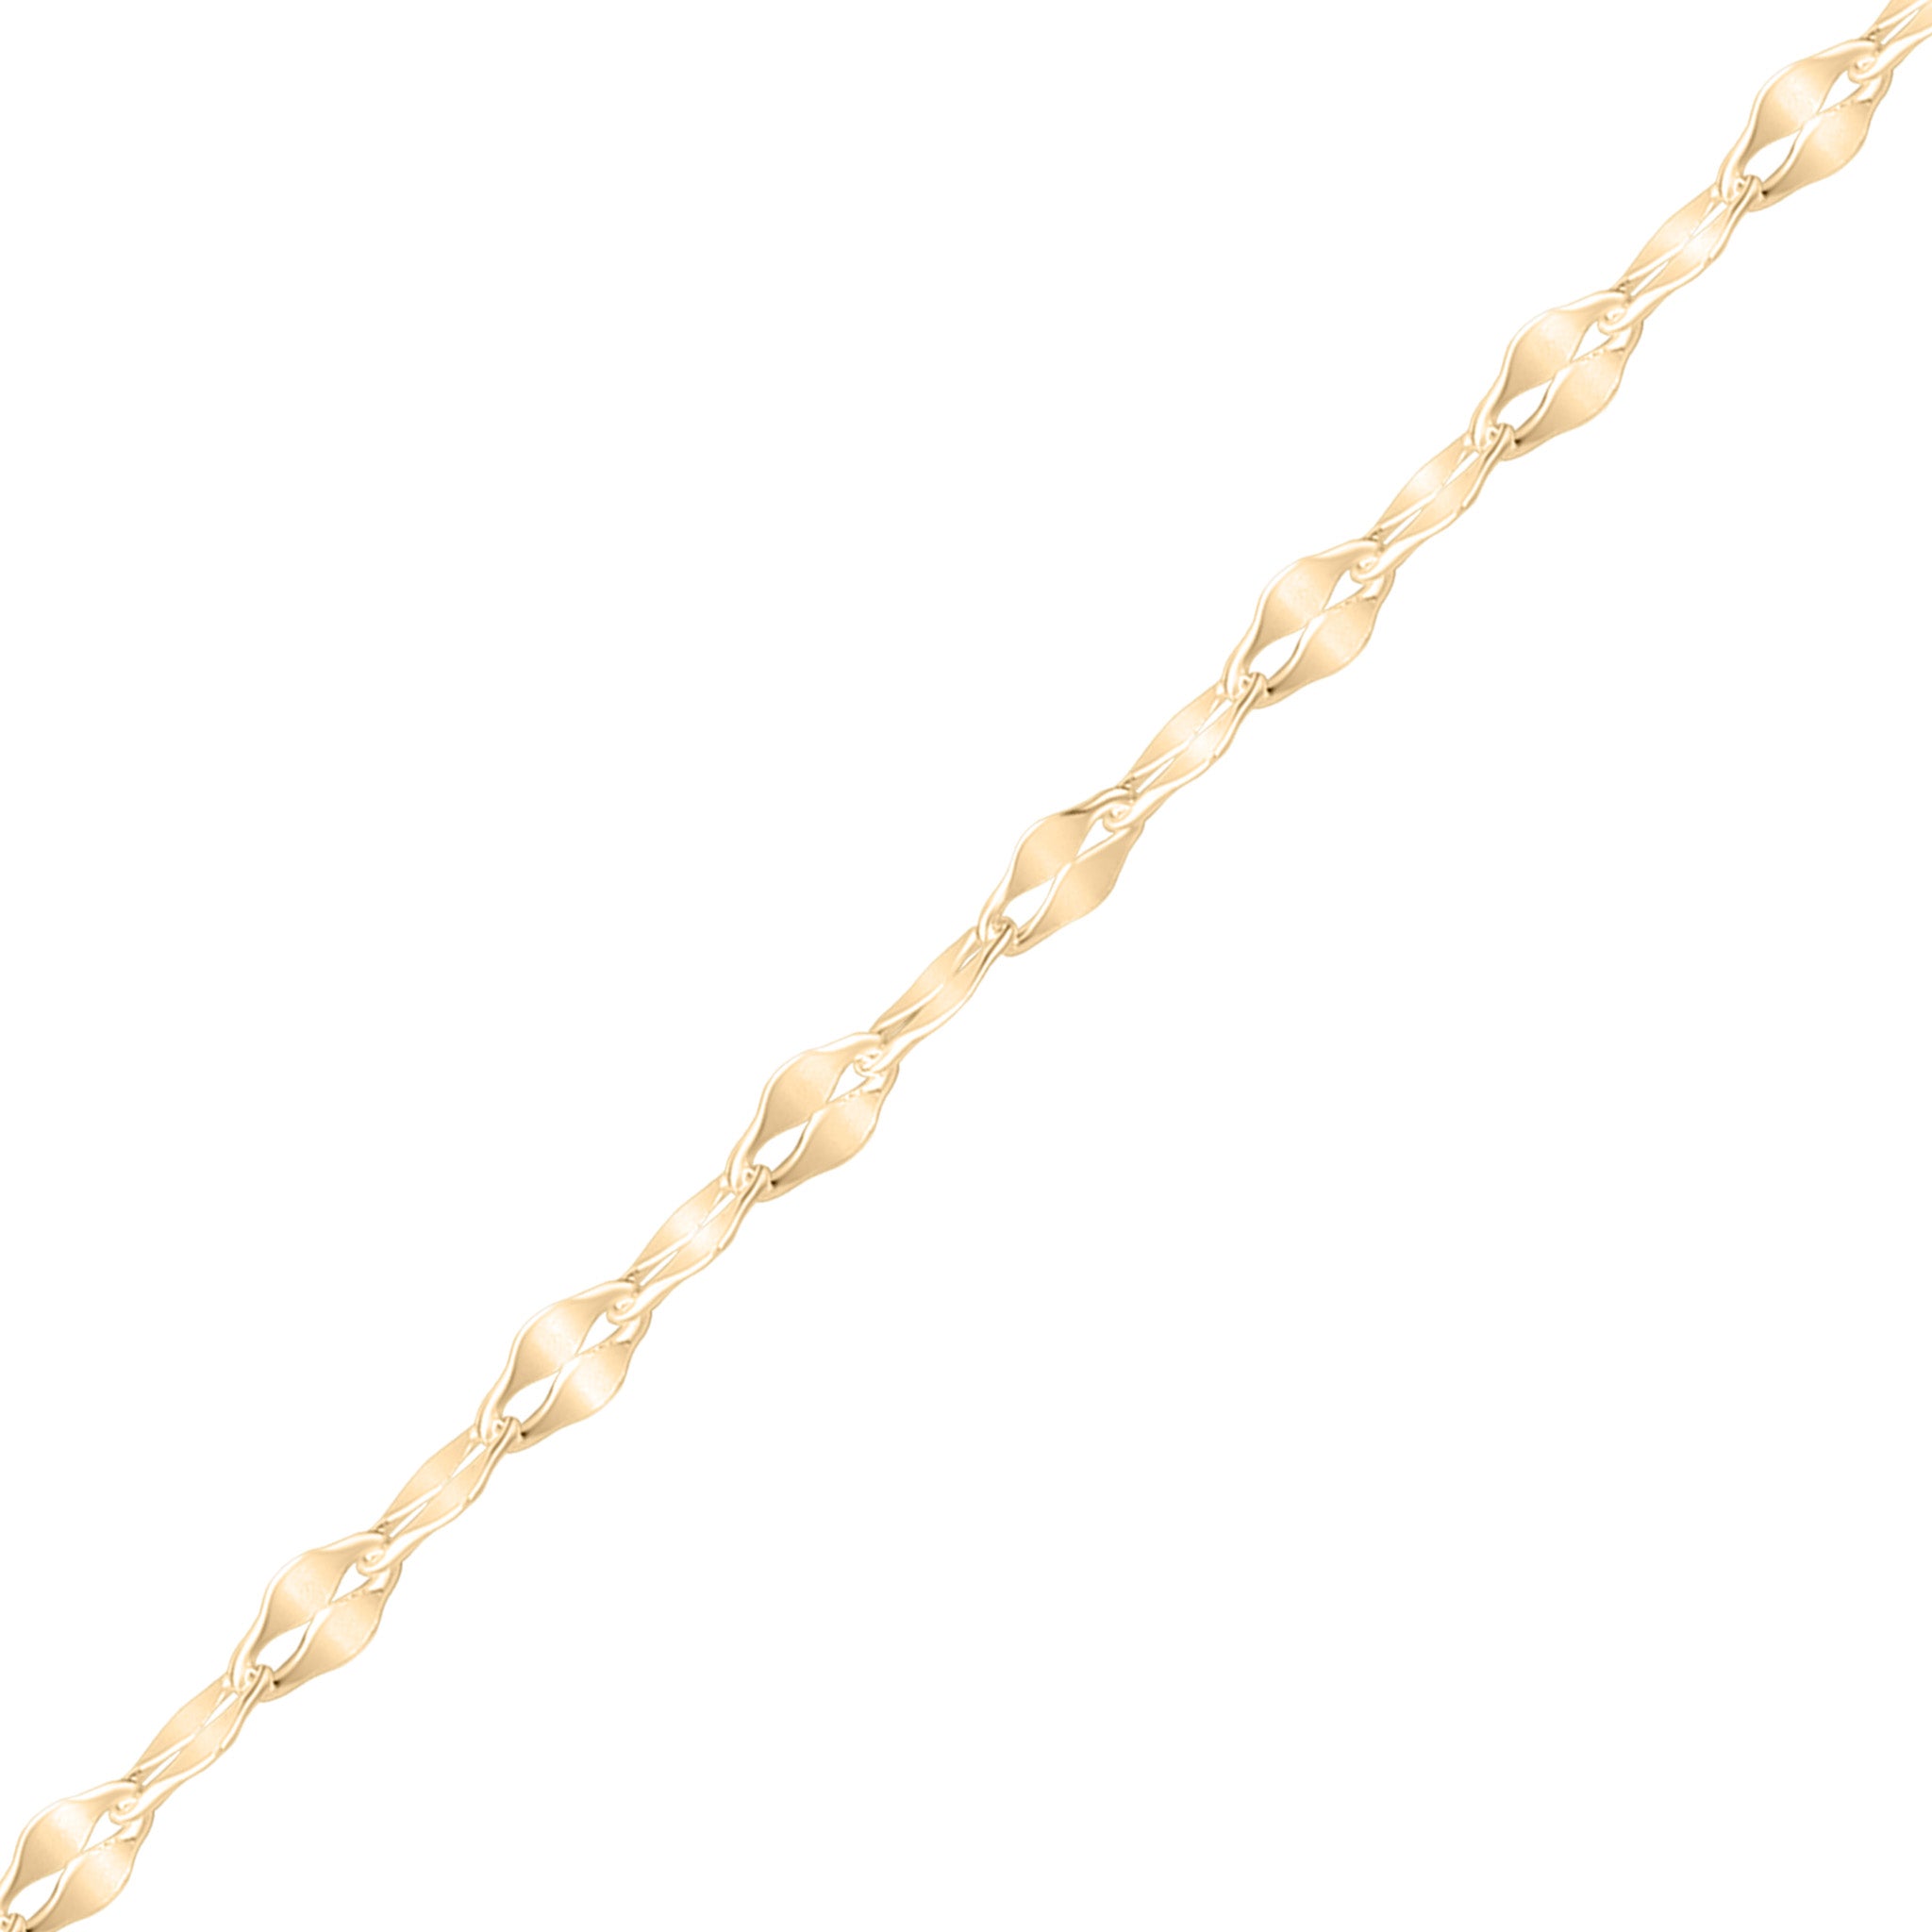 2.0 mm Lip Chain 14K Gold Plated .925 Sterling Silver Permanent Jewelry Chain - By the Foot / PMJ0022